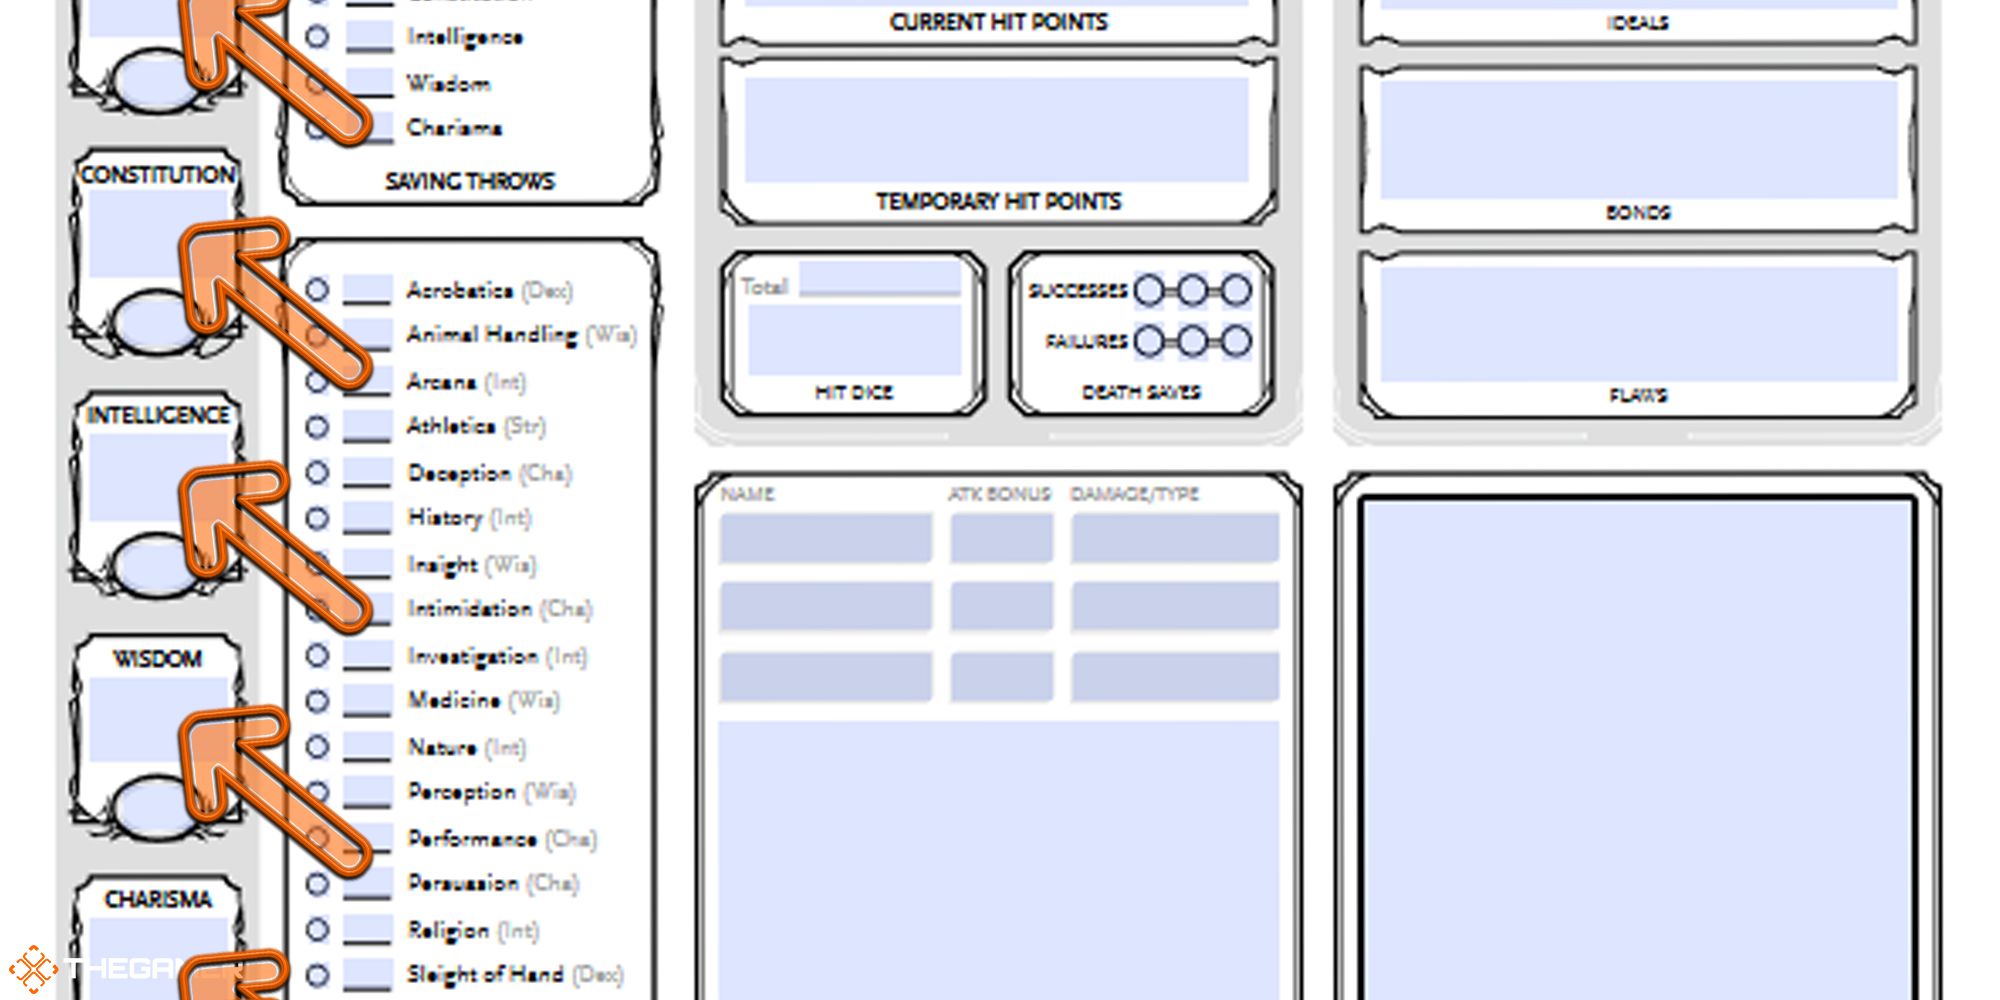 Dungeons and Dragons - character sheet, modifiers